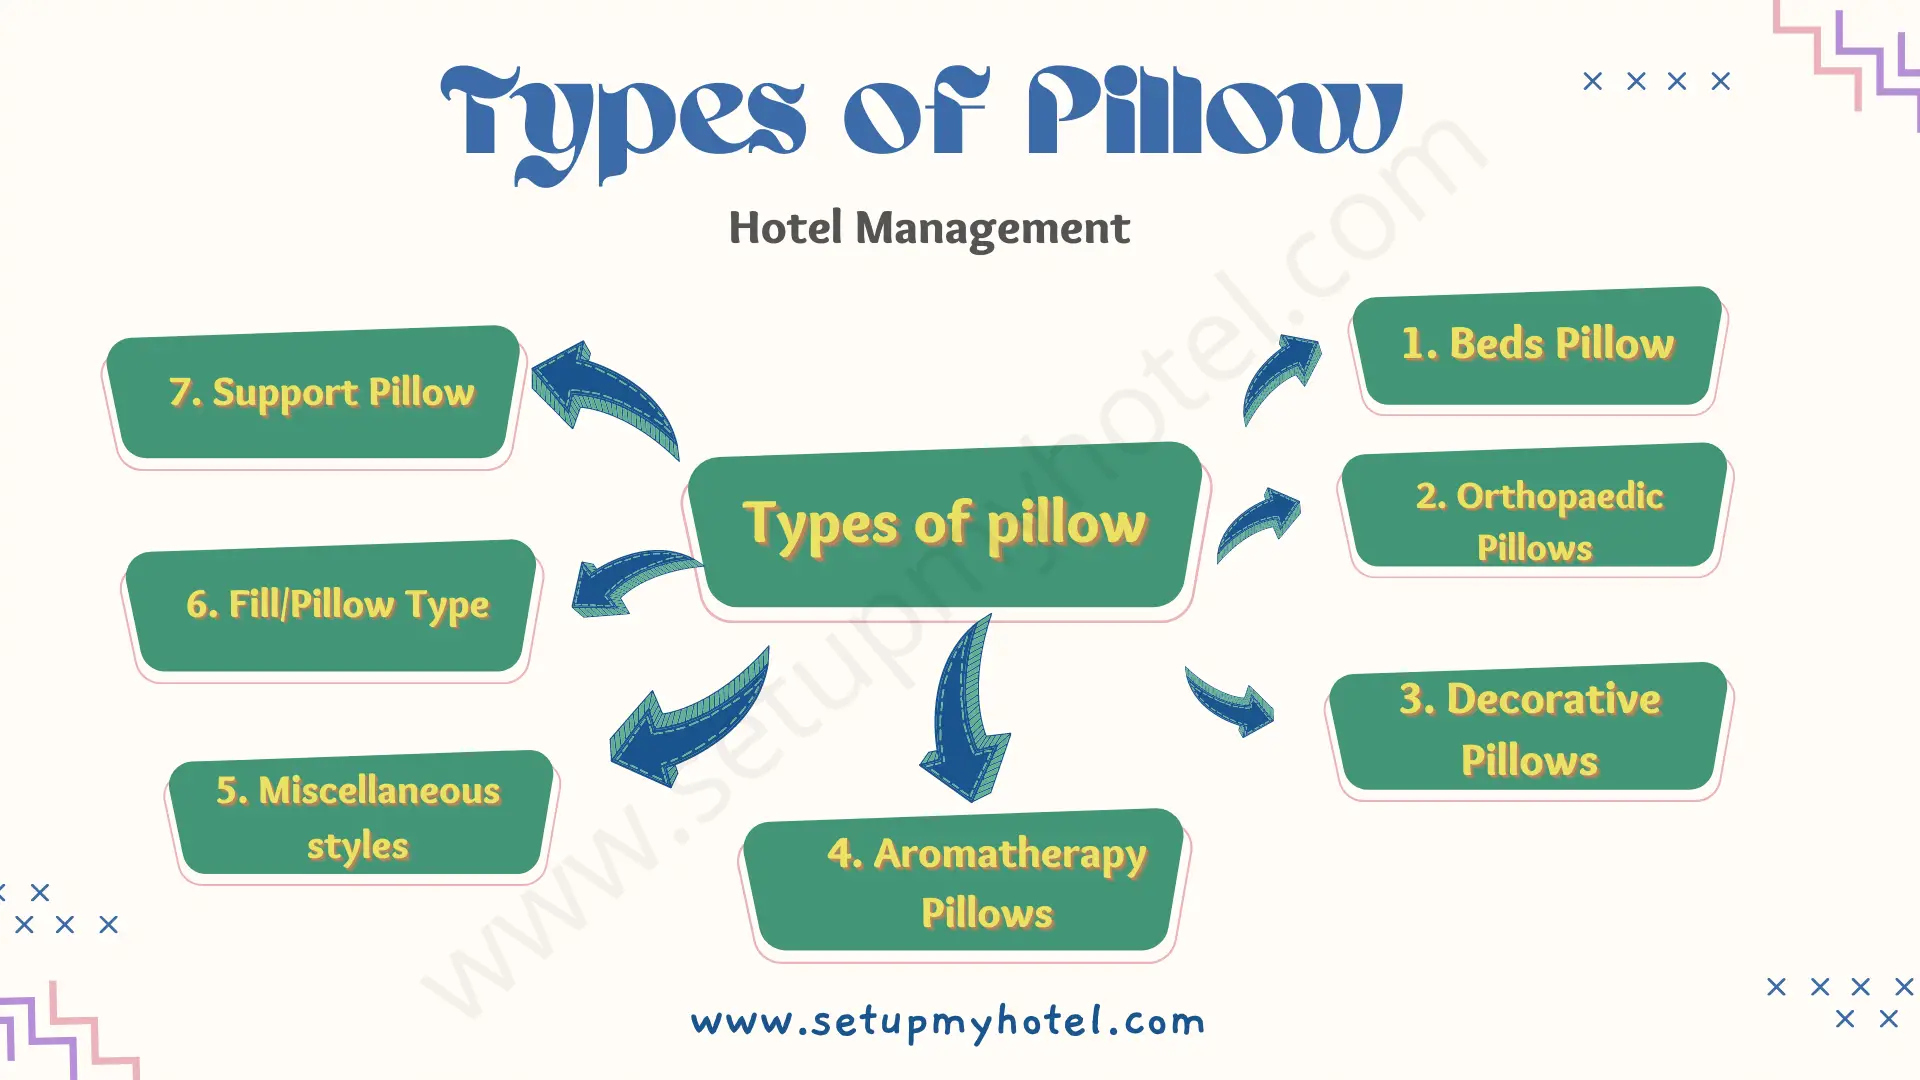 Hotels around the world aim to provide their guests with the best possible sleeping experience. One way they achieve this is by using various types of pillows. These pillows are carefully chosen to suit the different sleeping preferences and needs of their guests. One of the most commonly used pillows in hotels is the down pillow, which is made from the soft and fluffy feathers found under the outer layer of geese or ducks. Down pillows are known for their softness and ability to conform to the shape of the sleeper's head and neck. Another popular type of pillow used in hotels is the memory foam pillow. These pillows are made from a viscoelastic material that conforms to the sleeper's head and neck shape, providing excellent support and comfort. Memory foam pillows are also great at reducing pressure points, making them ideal for people with neck and shoulder pain. Hotels also use hypoallergenic pillows, which are made from materials that are less likely to cause allergic reactions. These pillows are great for guests who suffer from allergies or have sensitive skin. In addition to these types of pillows, hotels may also offer specialty pillows such as body pillows, wedge pillows, and cervical pillows. These pillows are designed to provide support for specific parts of the body, such as the back, legs, or neck. Overall, hotels take great care in selecting the right types of pillows to ensure that their guests have a comfortable and restful sleep during their stay.